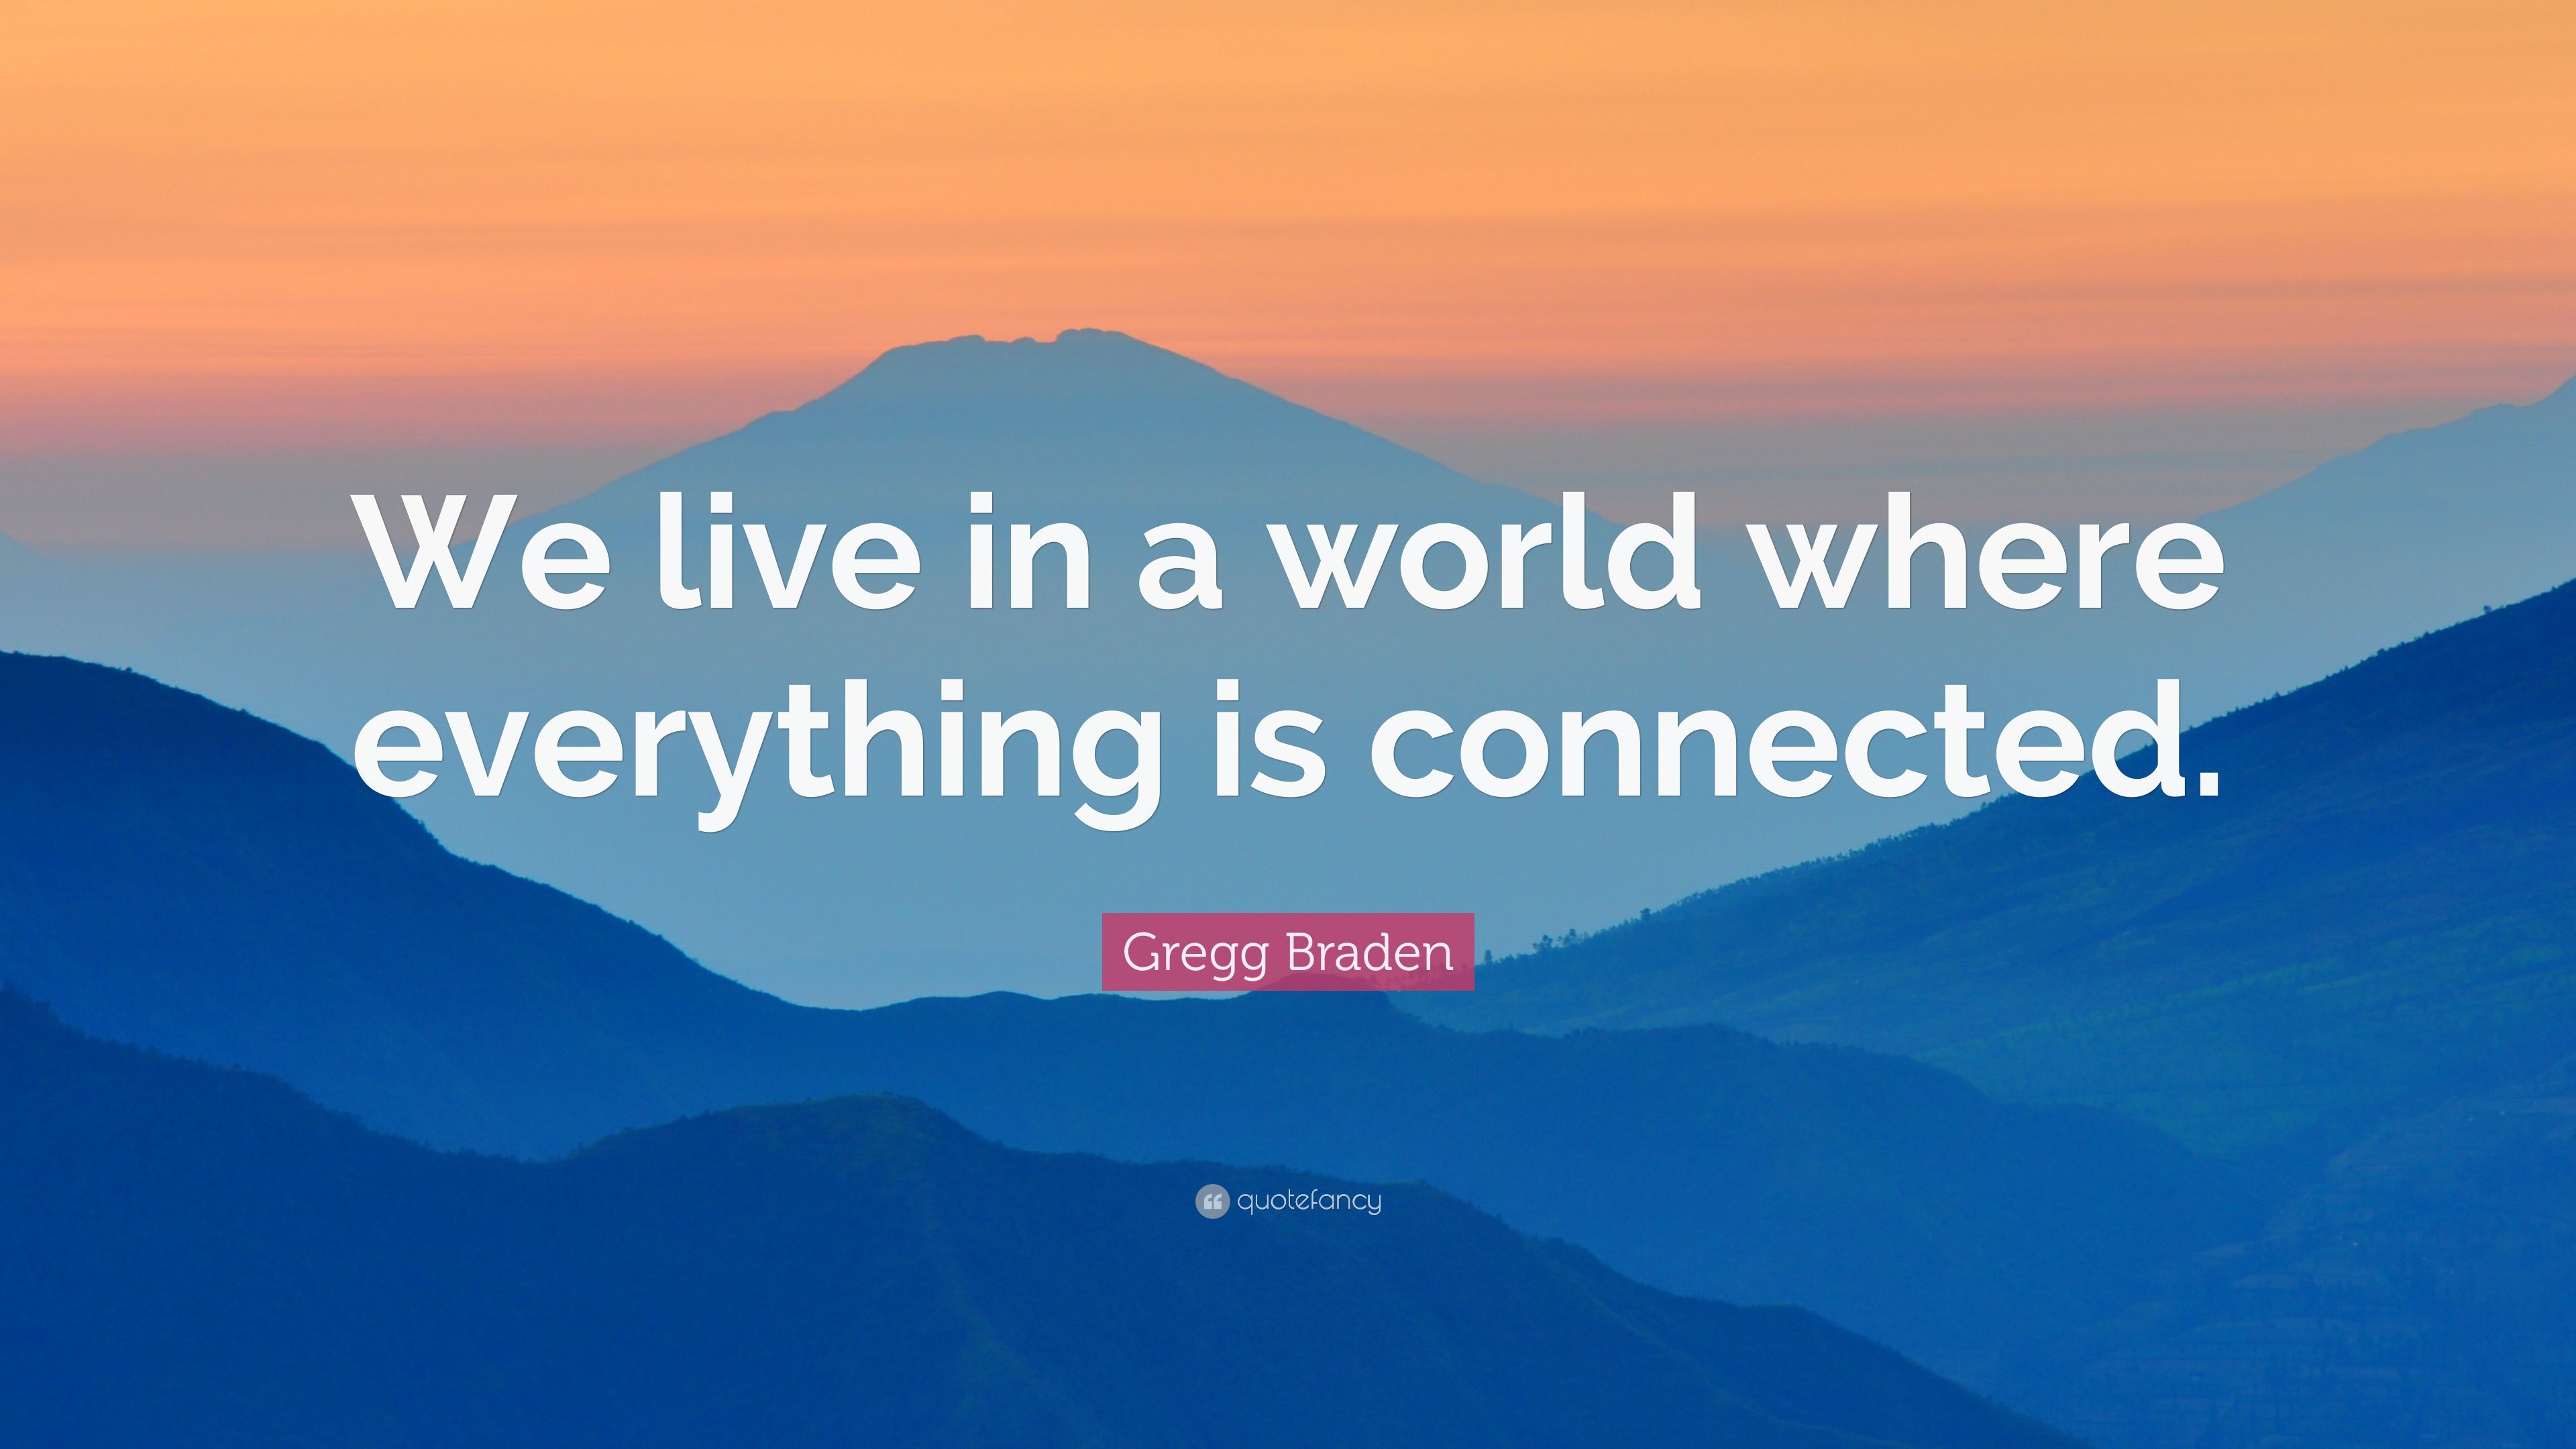 Gregg Braden Quote: “We live in a world where everything is connected.” (9 wallpaper)